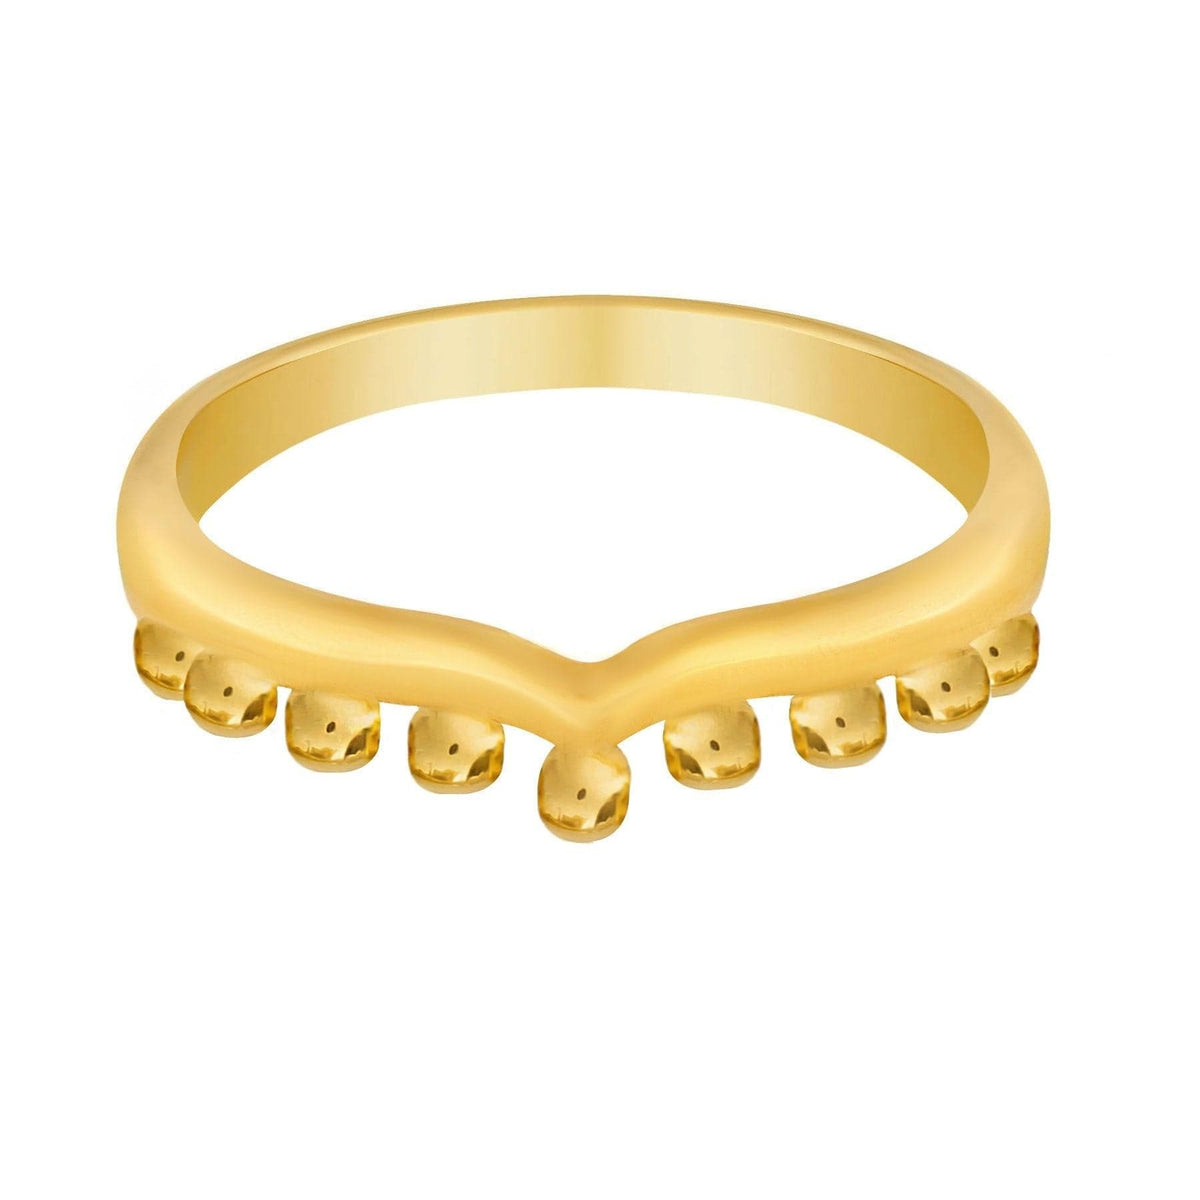 BohoMoon Stainless Steel Sloane Ring Gold / US 6 / UK L / EUR 51 (small)